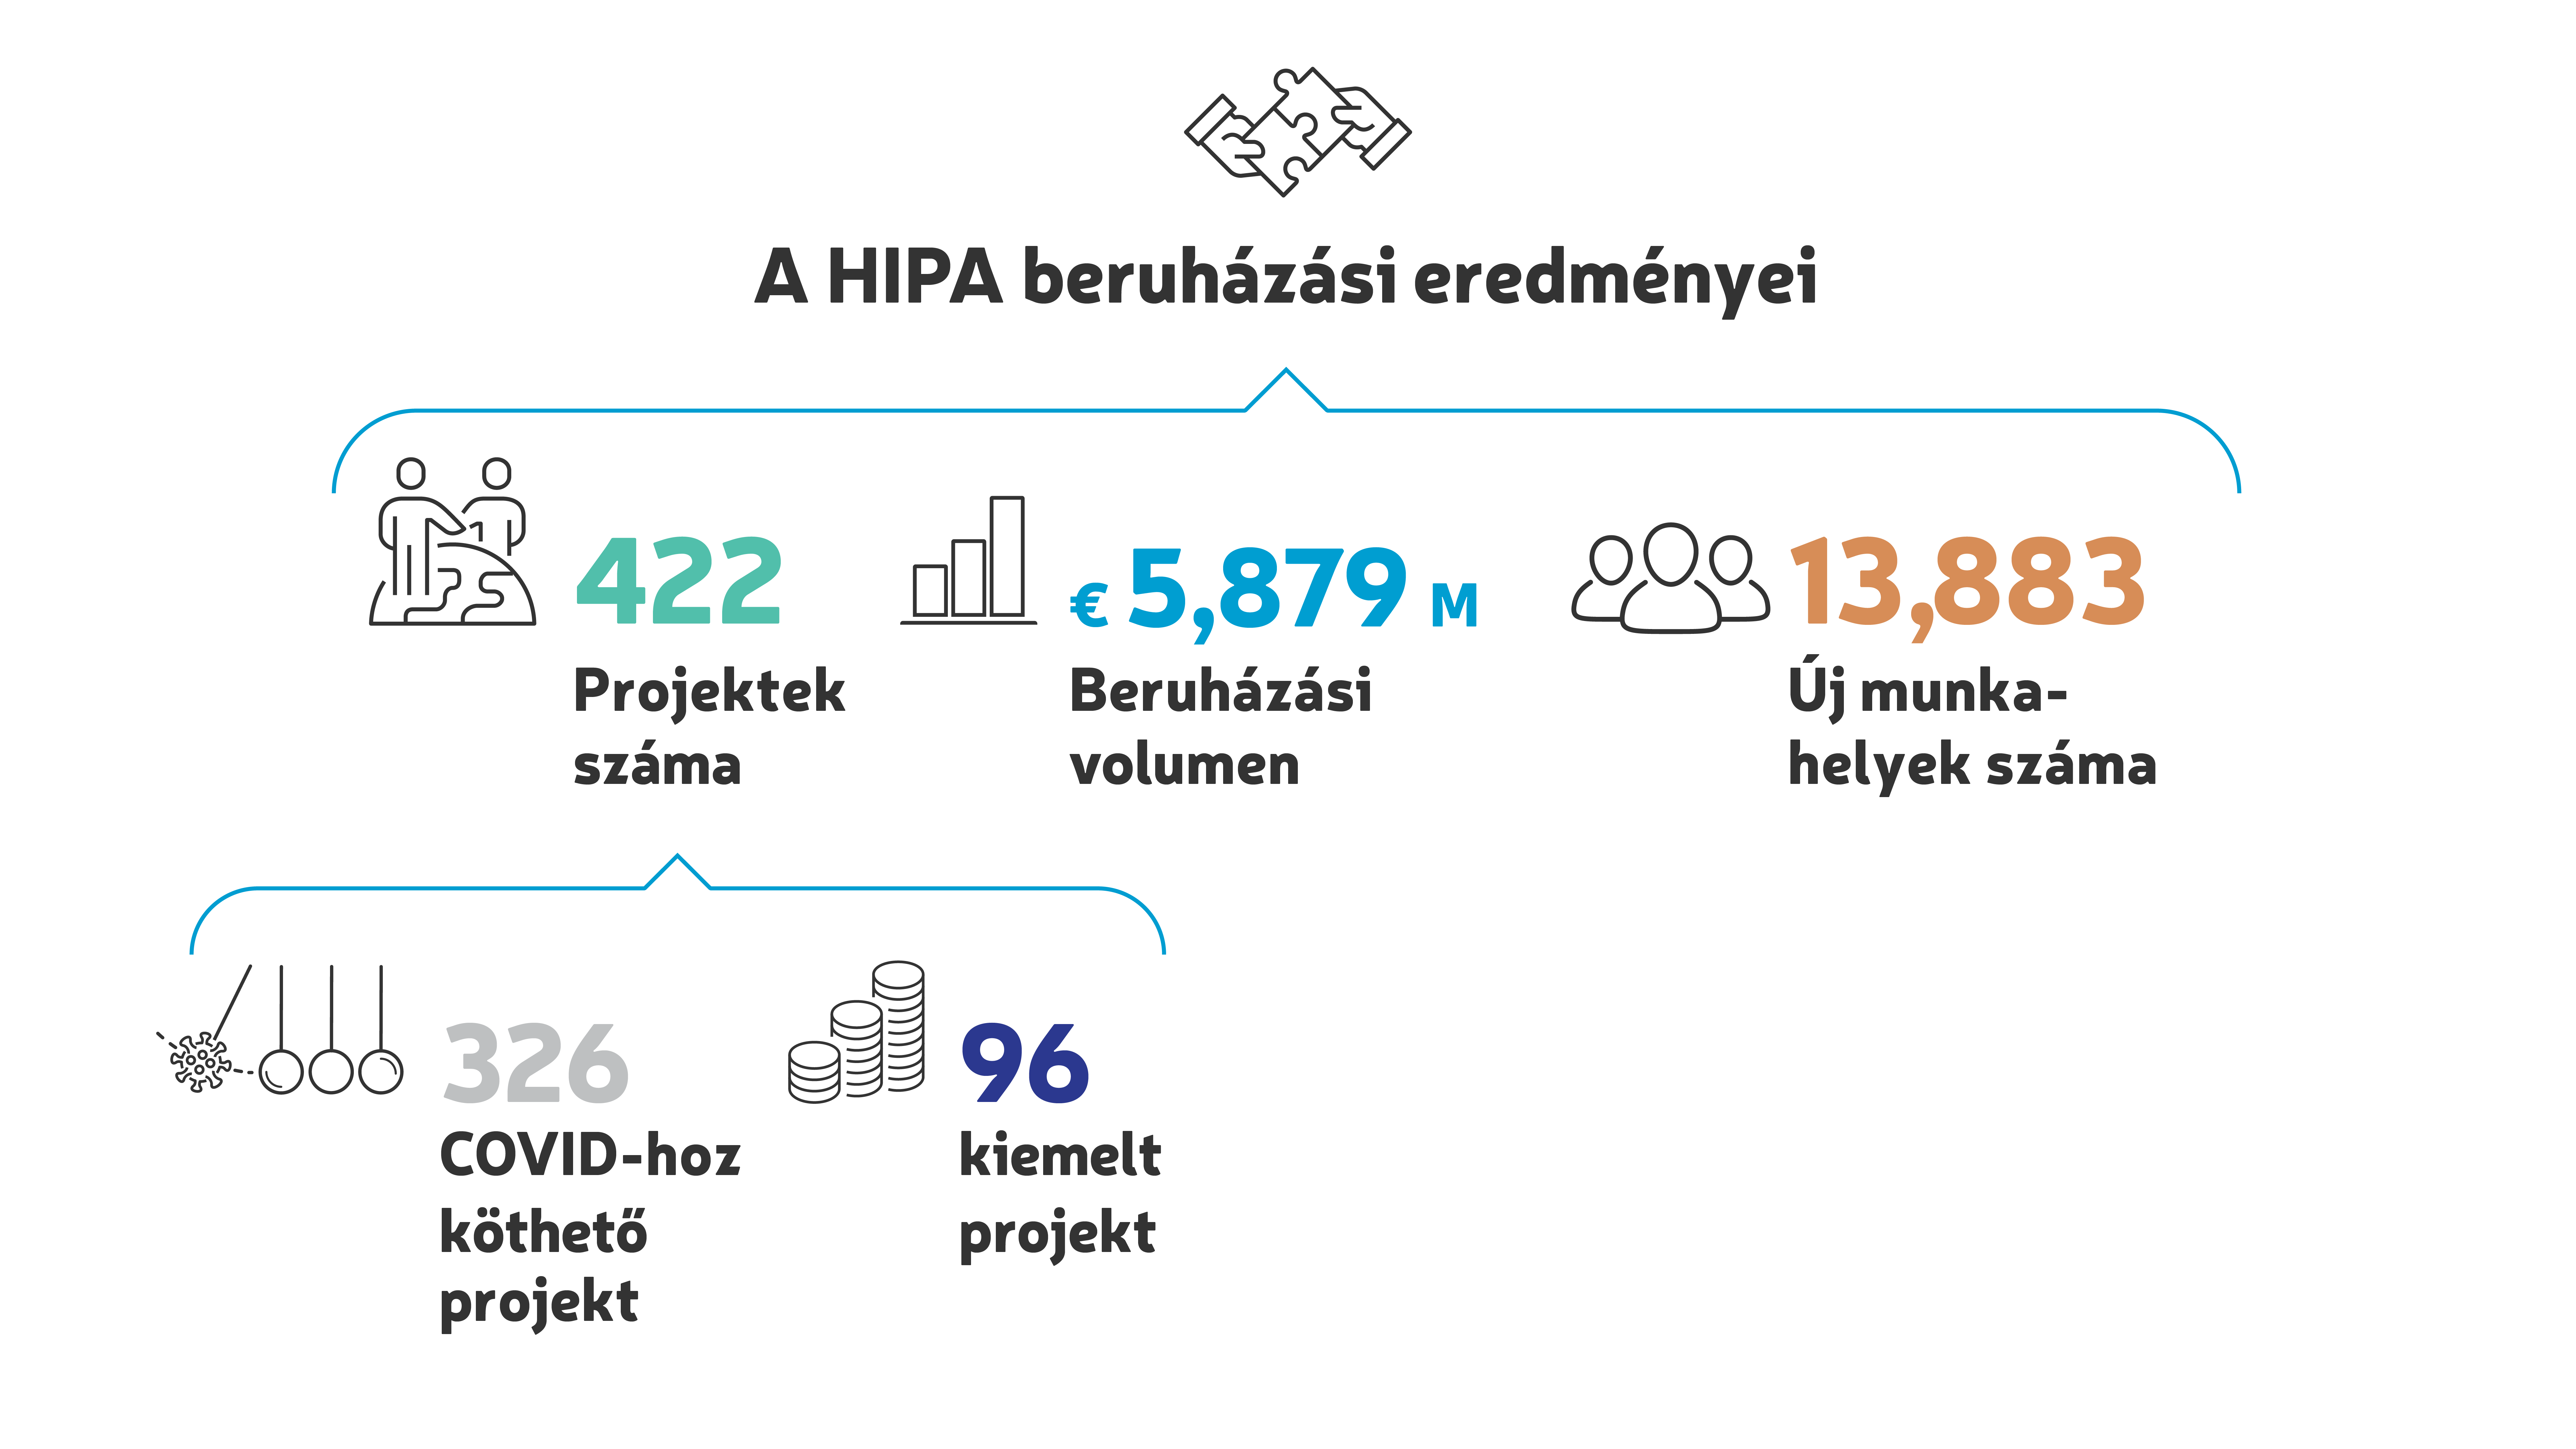 2021 hipa Investment results